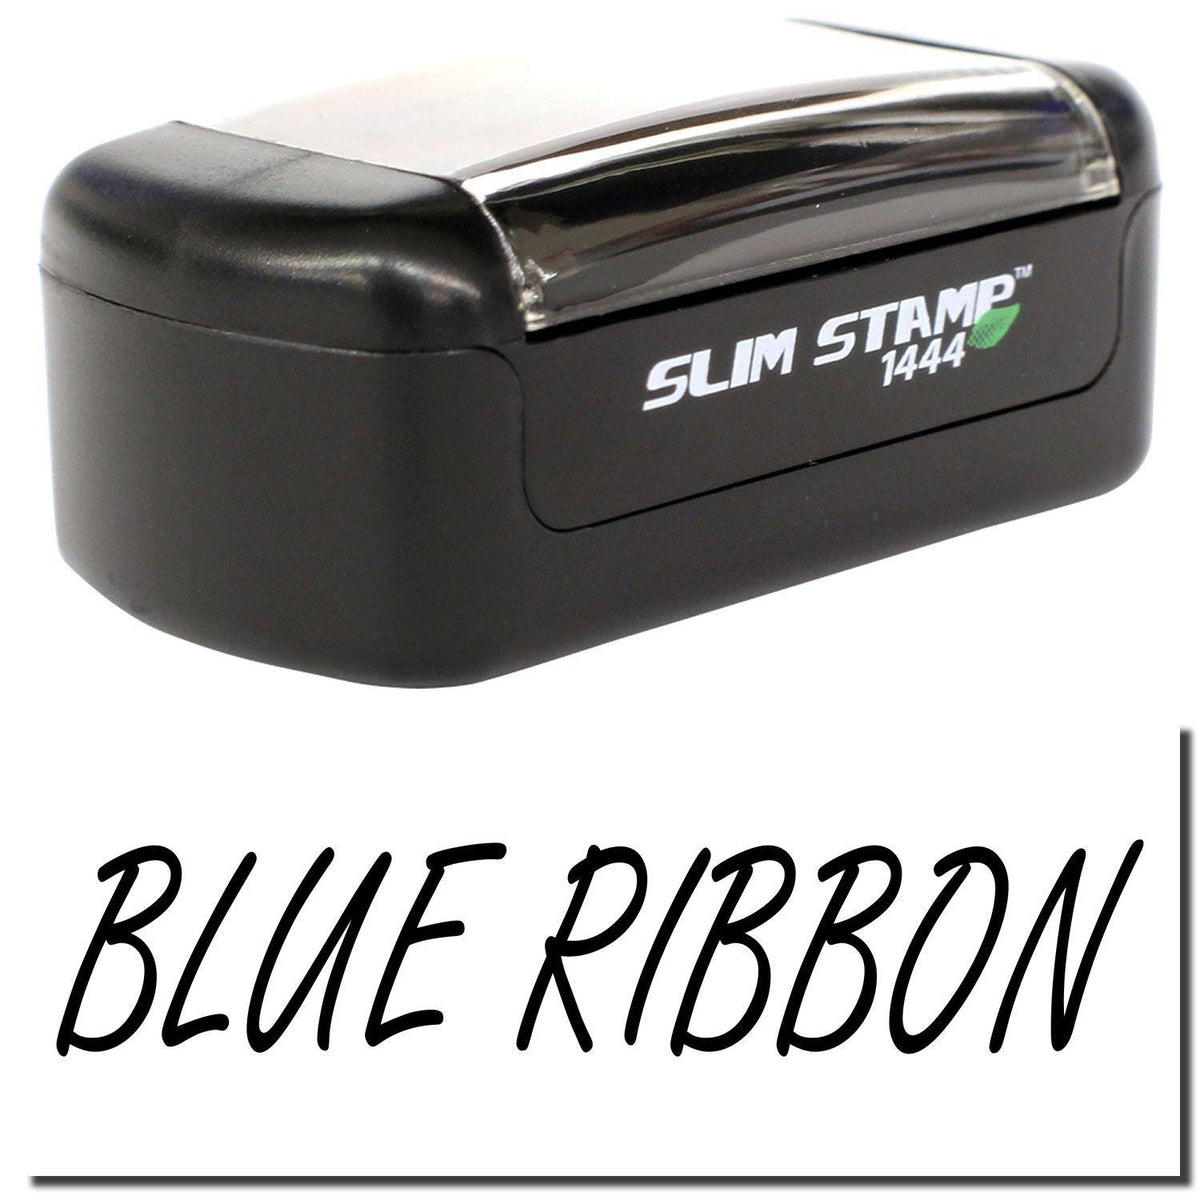 A stock office pre-inked stamp with a stamped image showing how the text &quot;BLUE RIBBON&quot; is displayed after stamping.